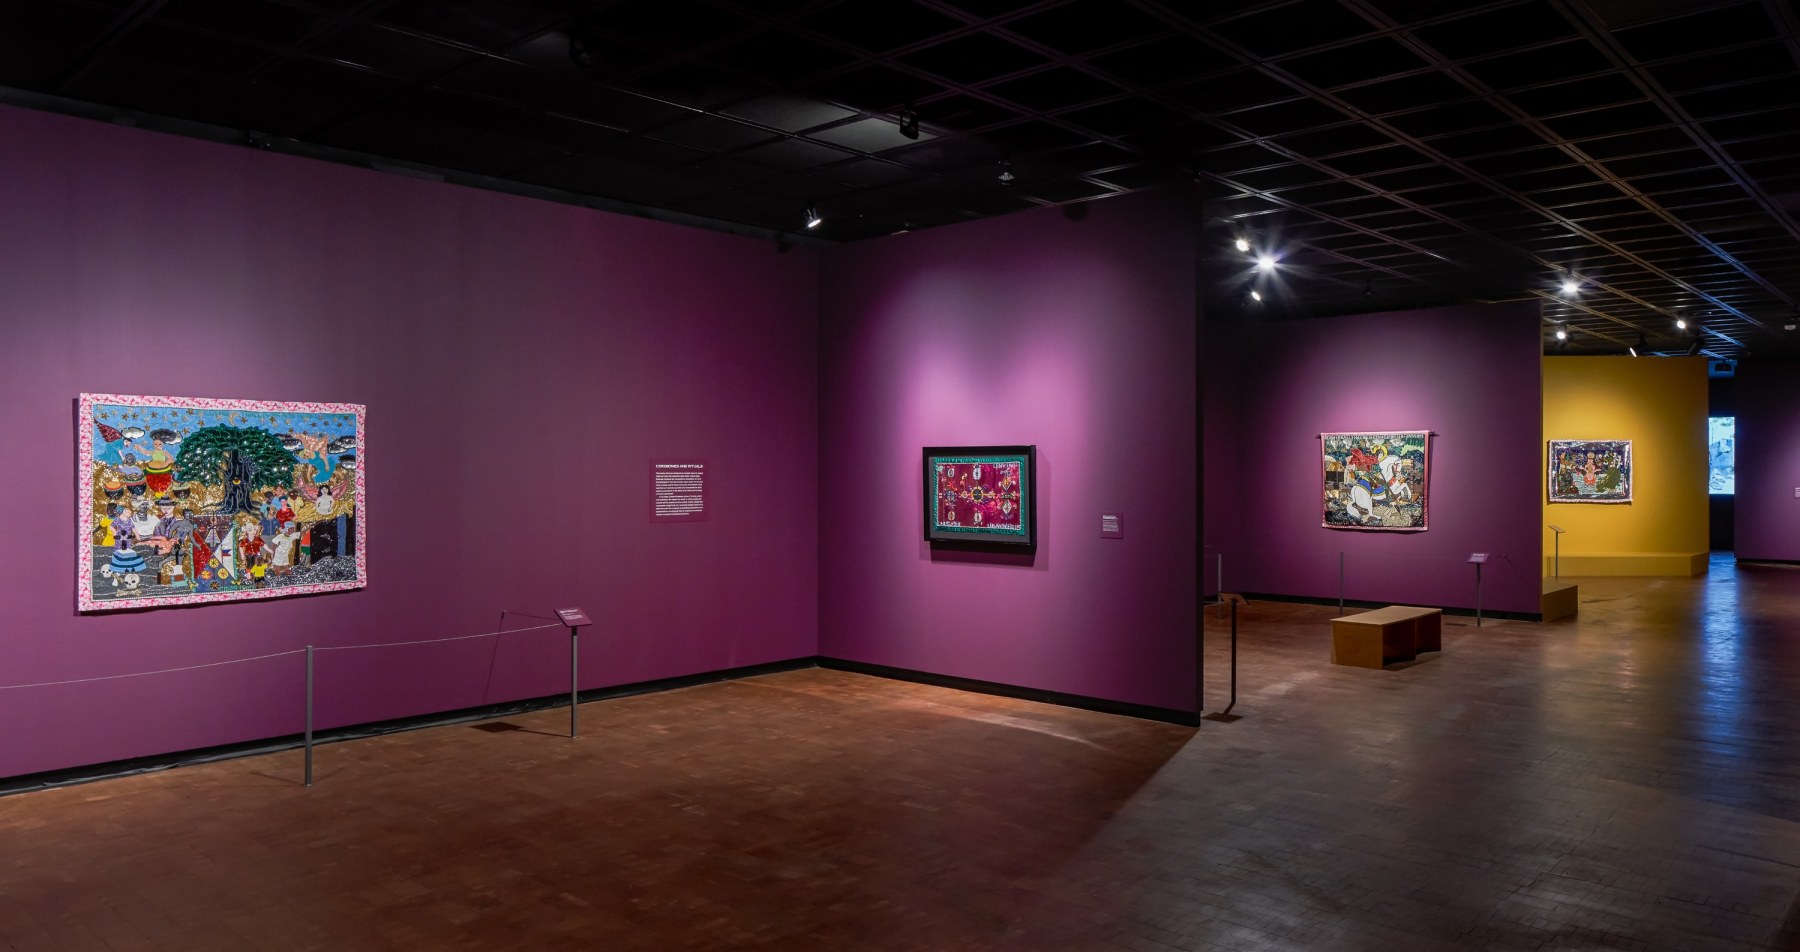 Installation view, Myrlande Constant: The Work of Radiance, Fowler Museum at UCLA, 2023. Photo: Elon Schoenholz